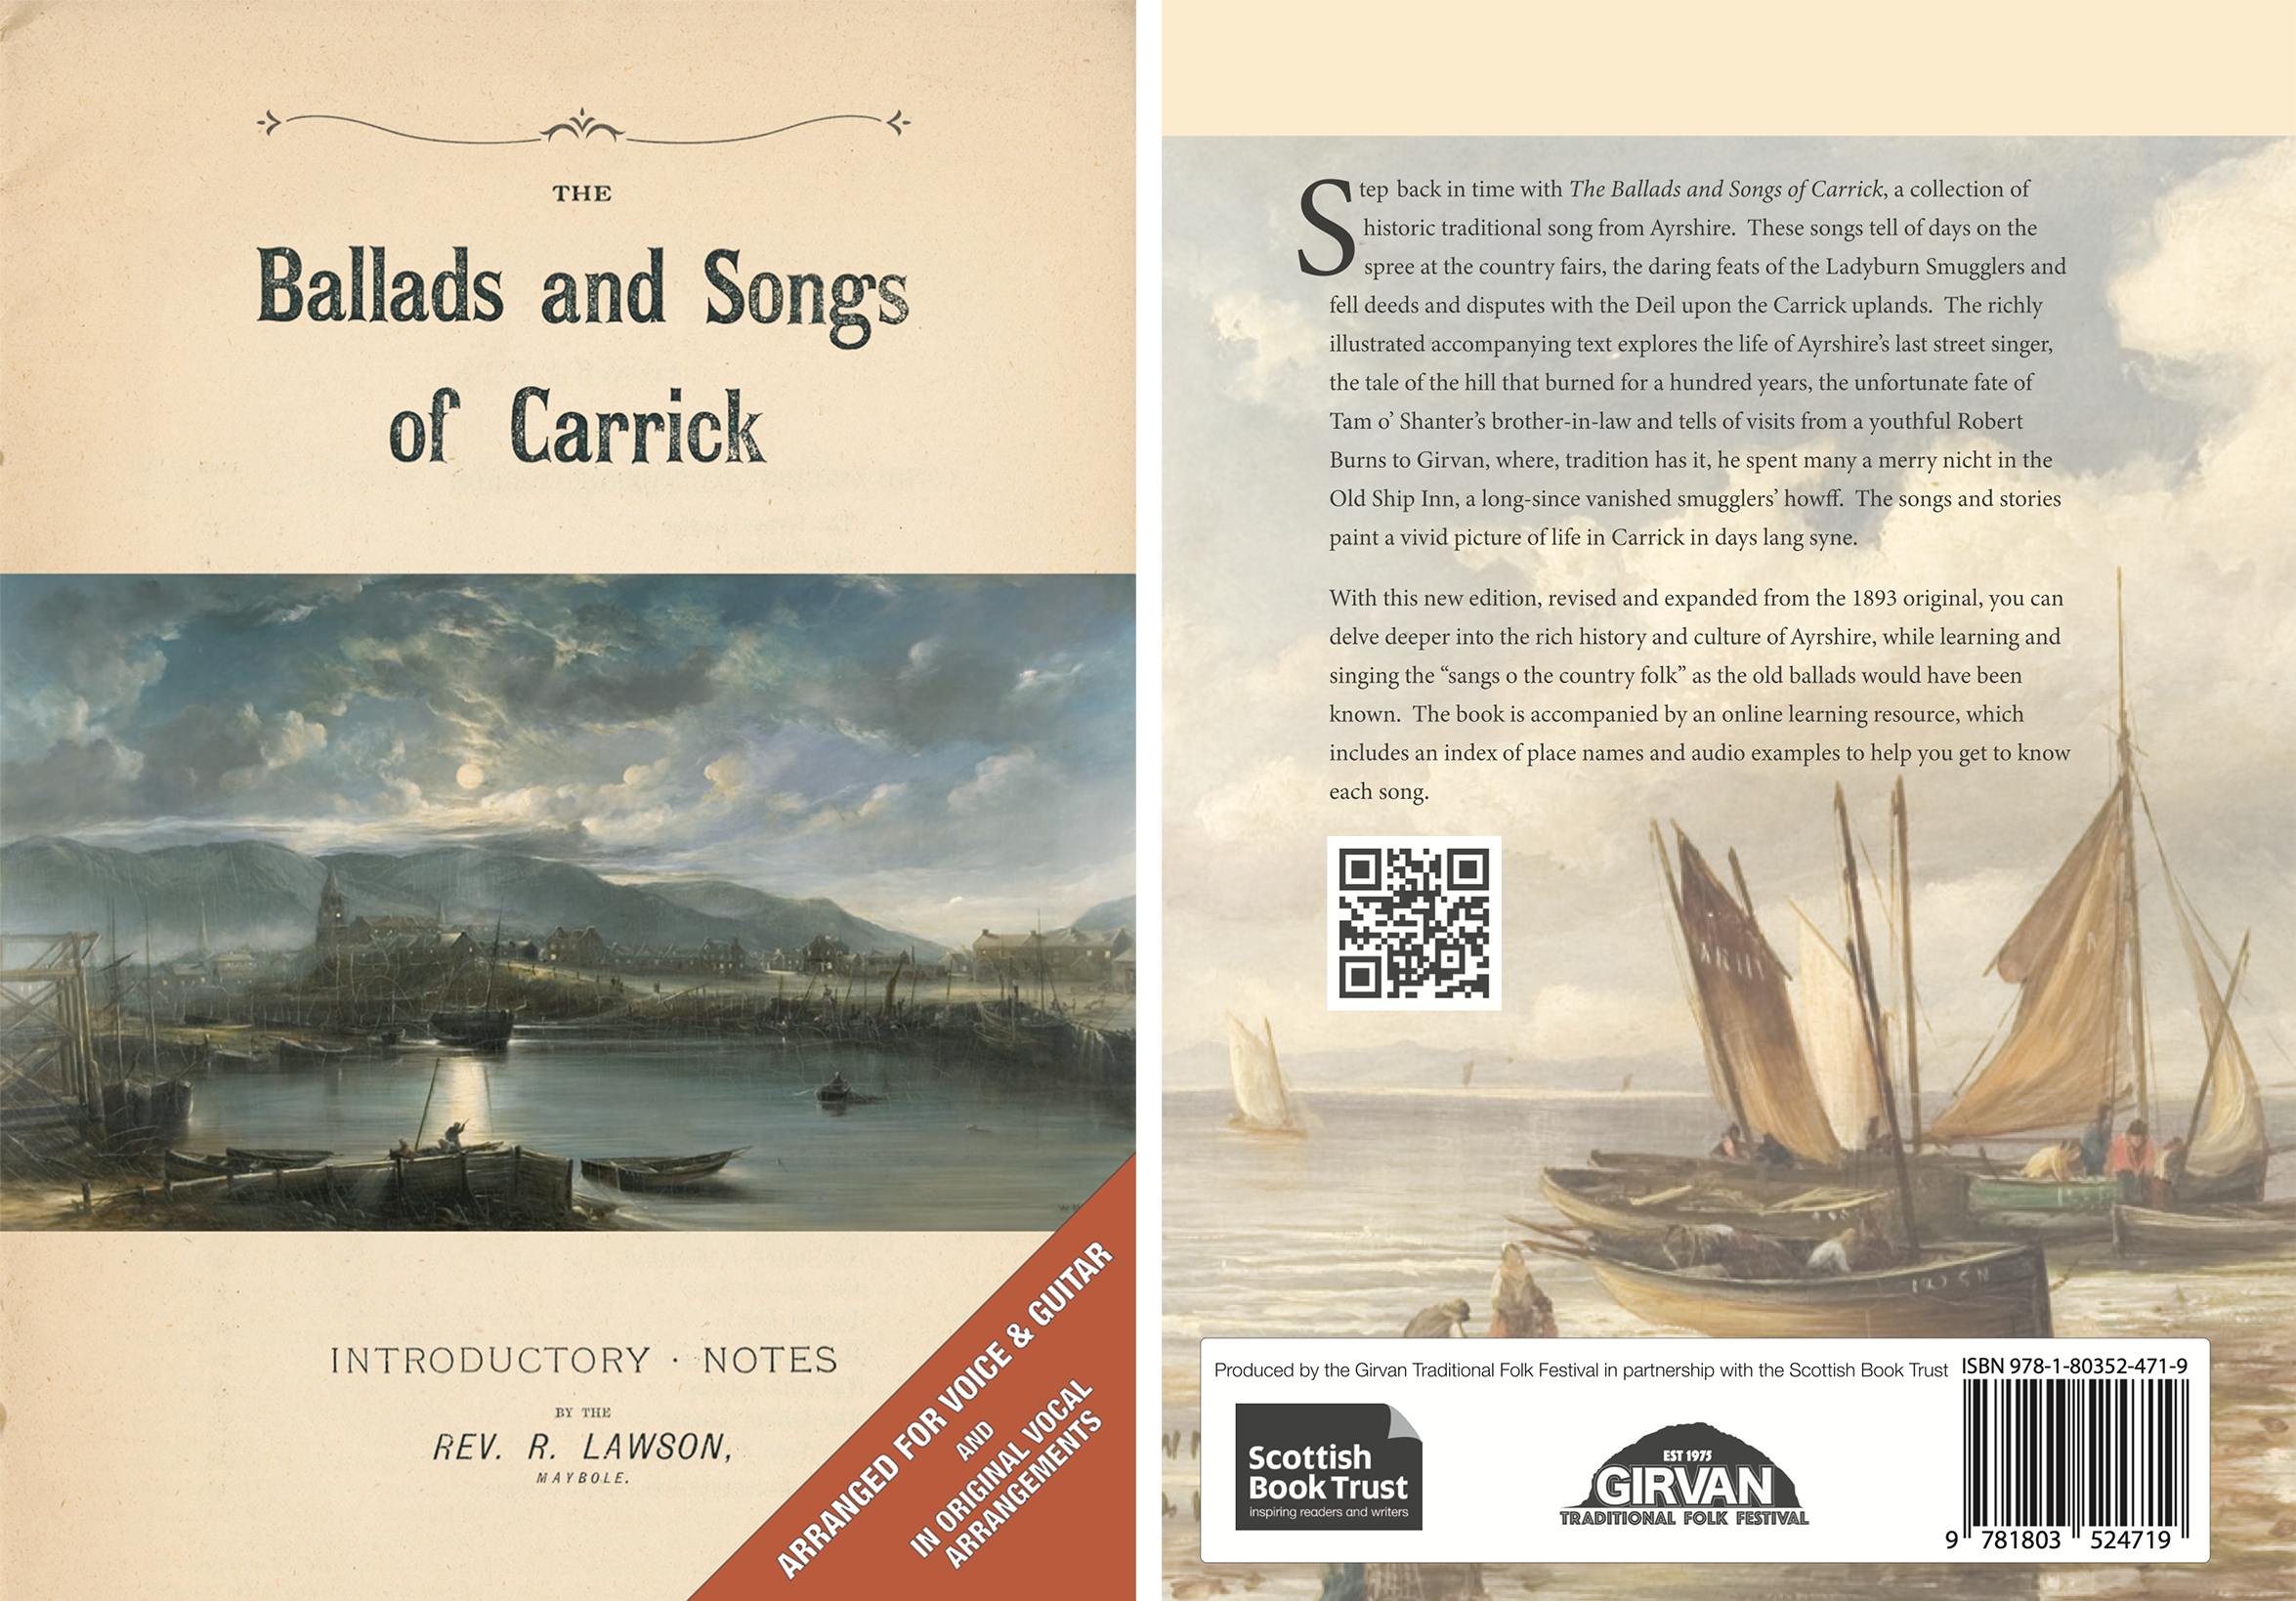 Covers of The Ballads and Songs of Carrick